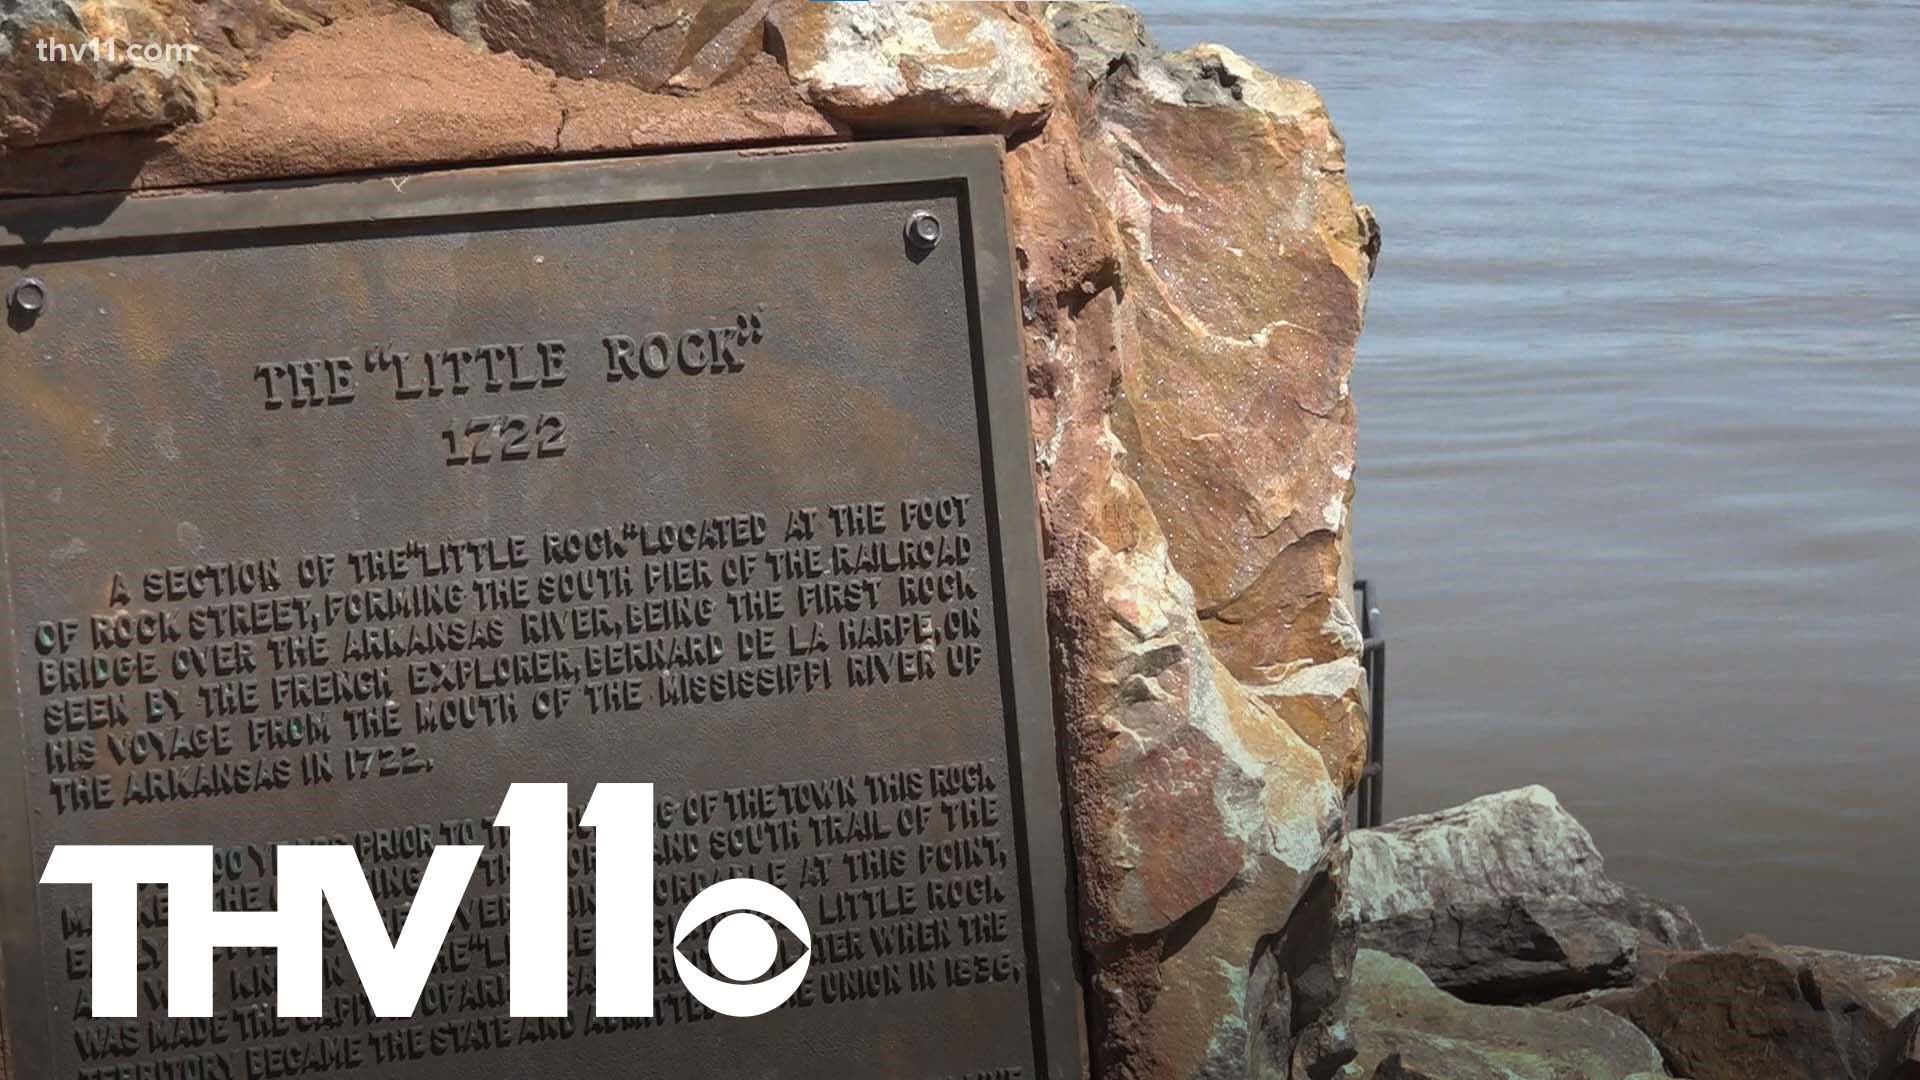 300 years ago, de la Harpe discovered a small rock outcropping in the Arkansas River. He called it "La Petit Roche," or "The Little Rock," and the name has stuck.